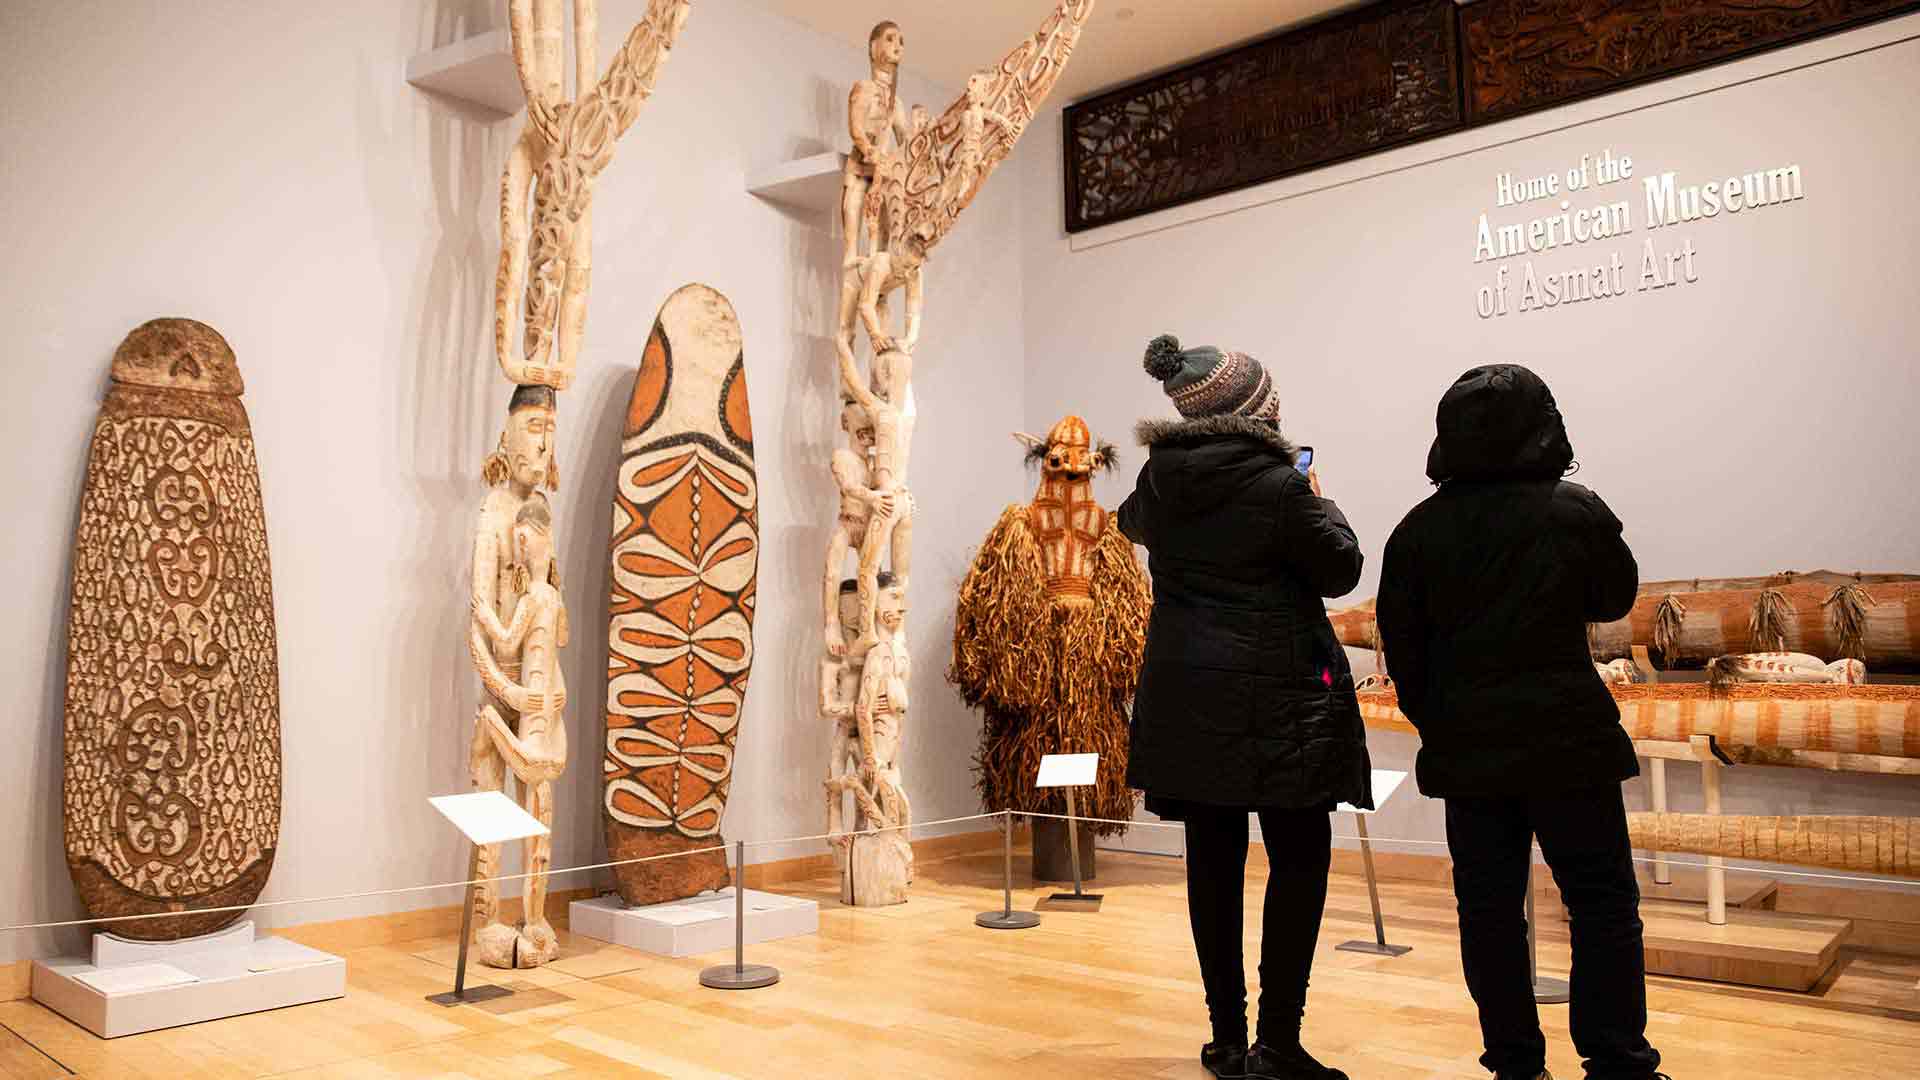 Two students standing in the American Museum of Asmat Art